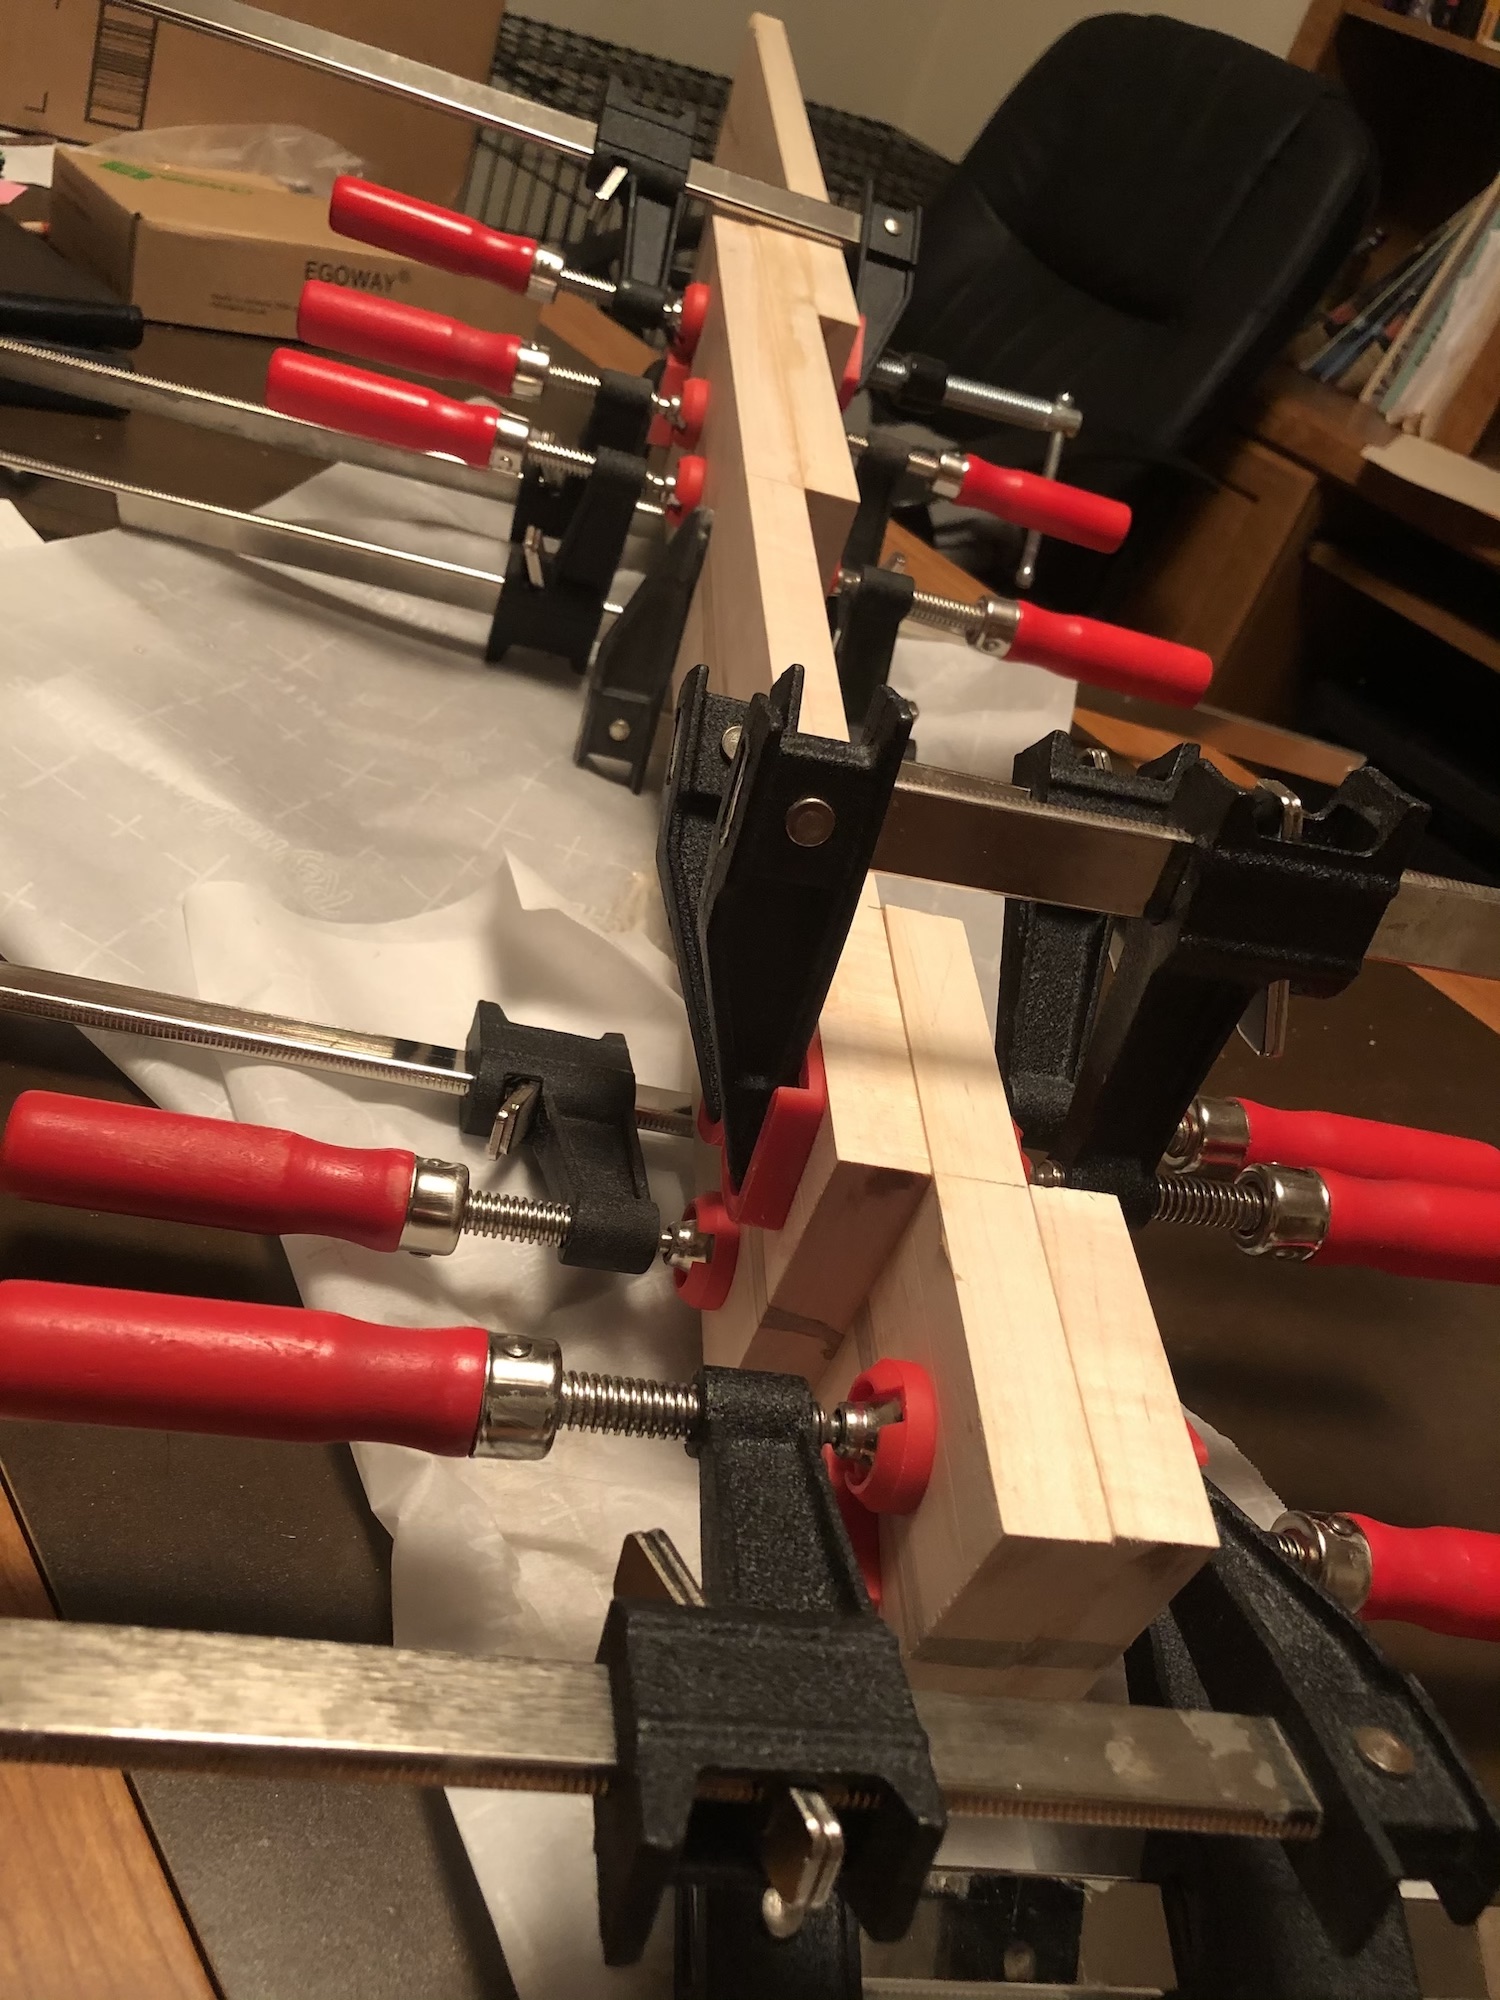 Clamping and gluing (another view)